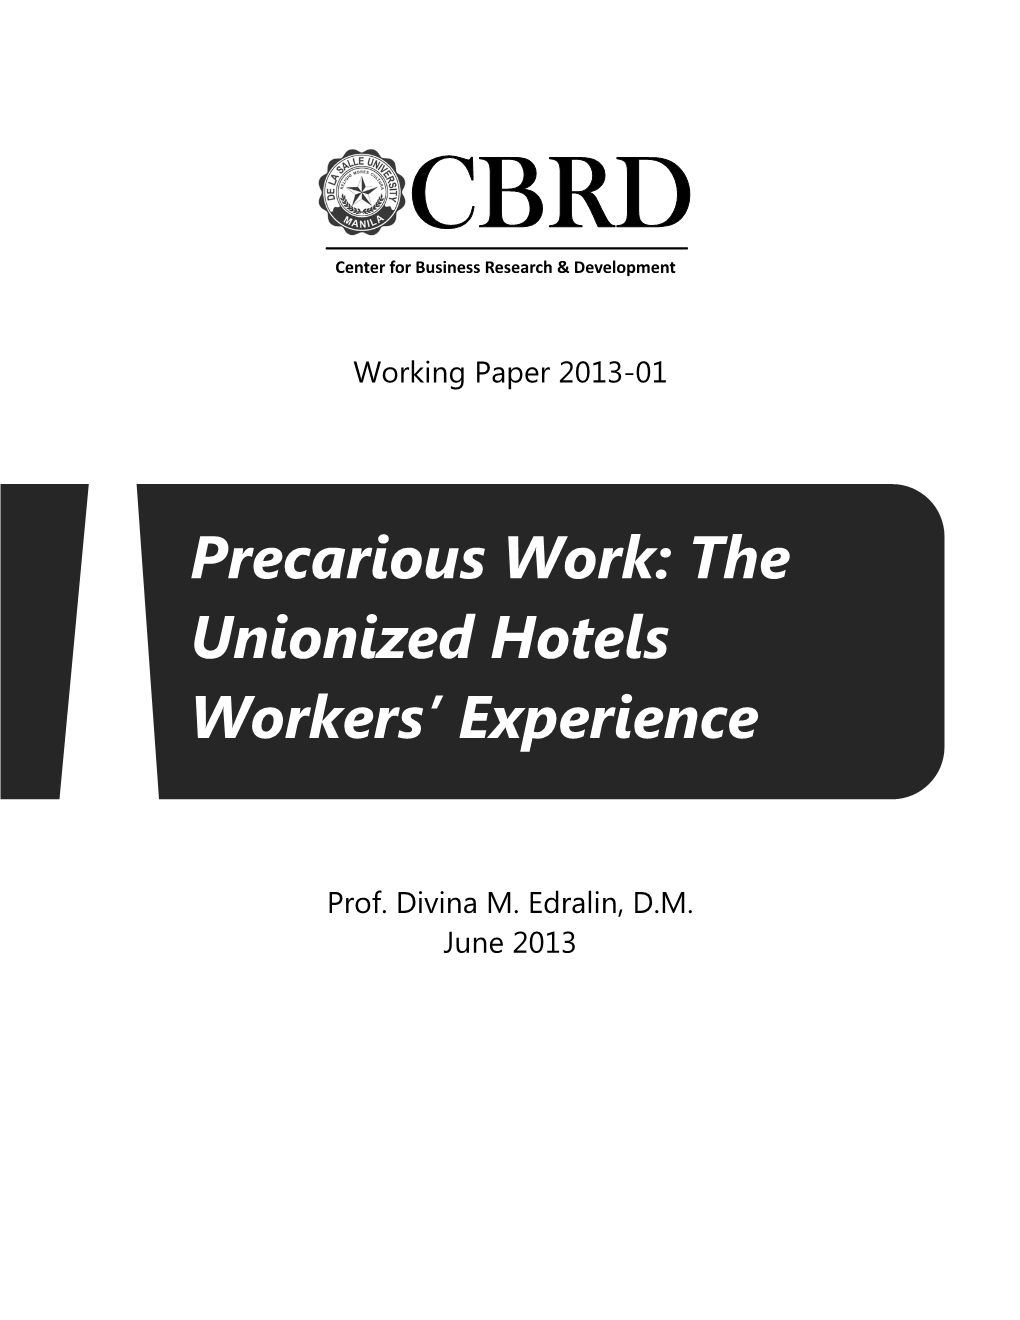 Precarious Work: the Unionized Hotels Workers' Experience